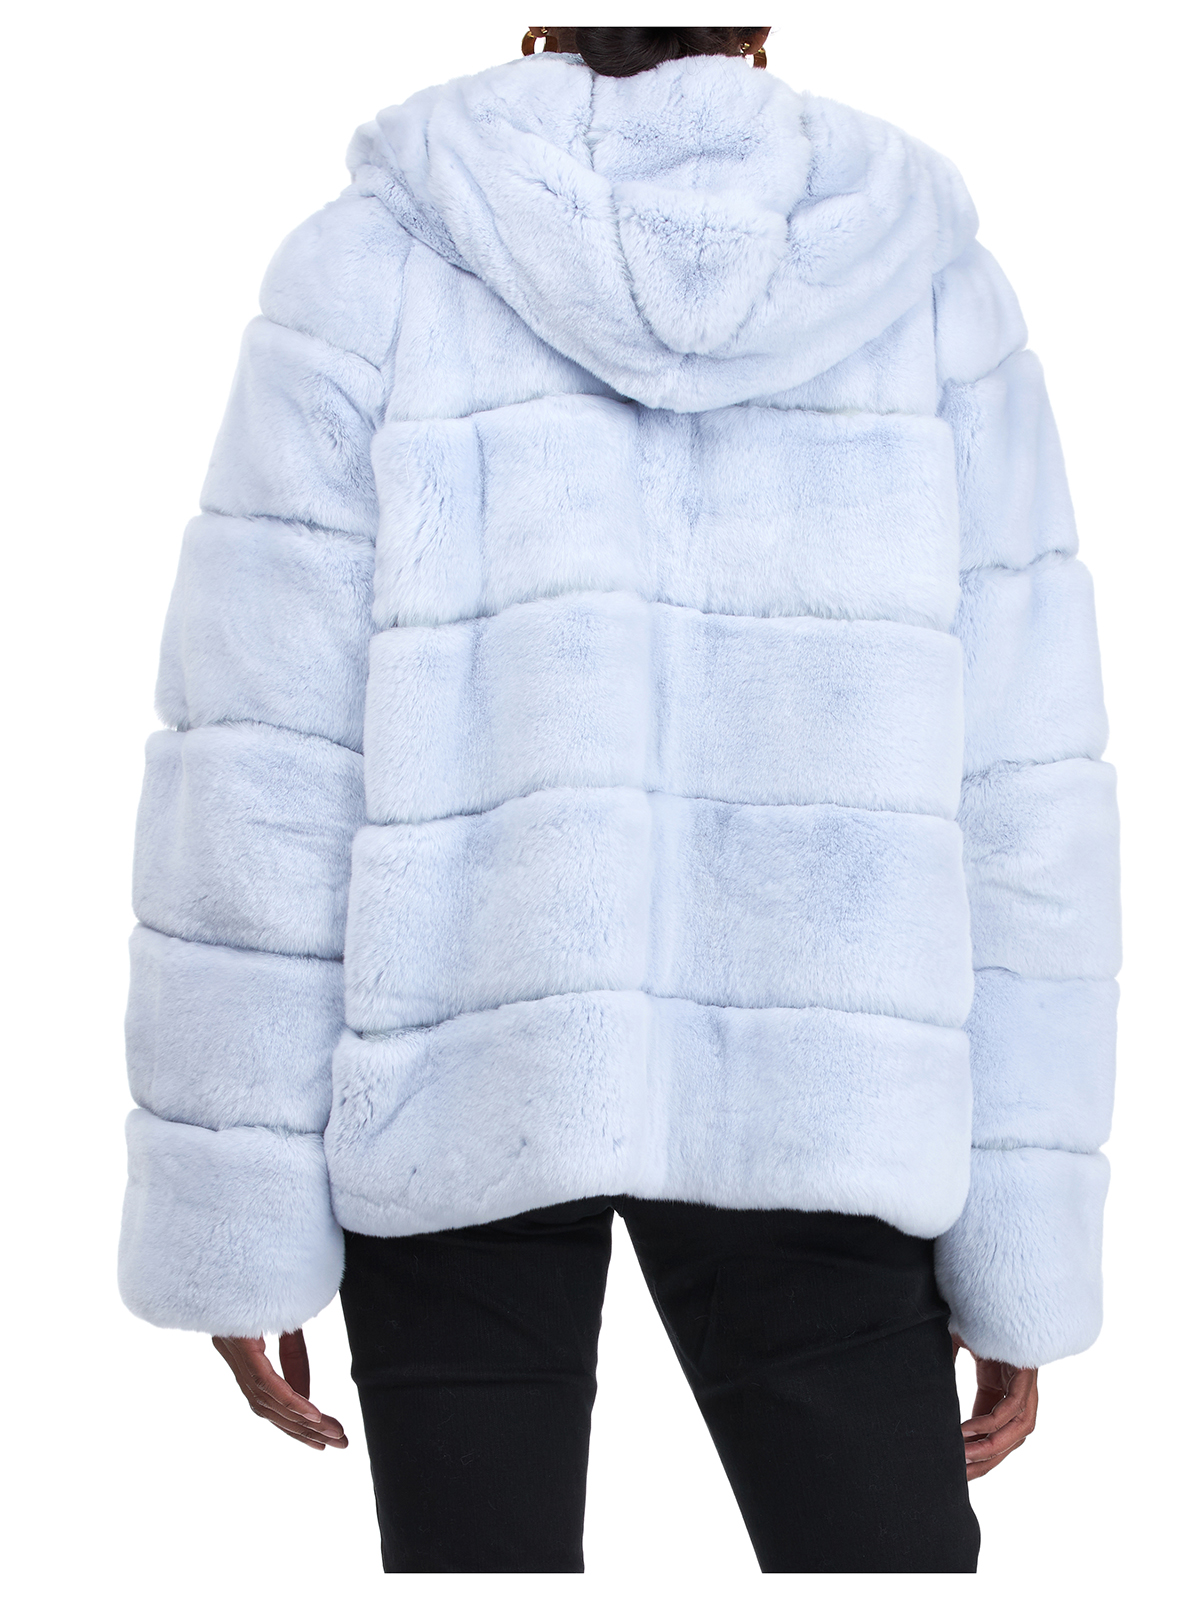 Gorski Woman's Sky Blue Rex Rabbit Fur Jacket Reversible to Quilted ...